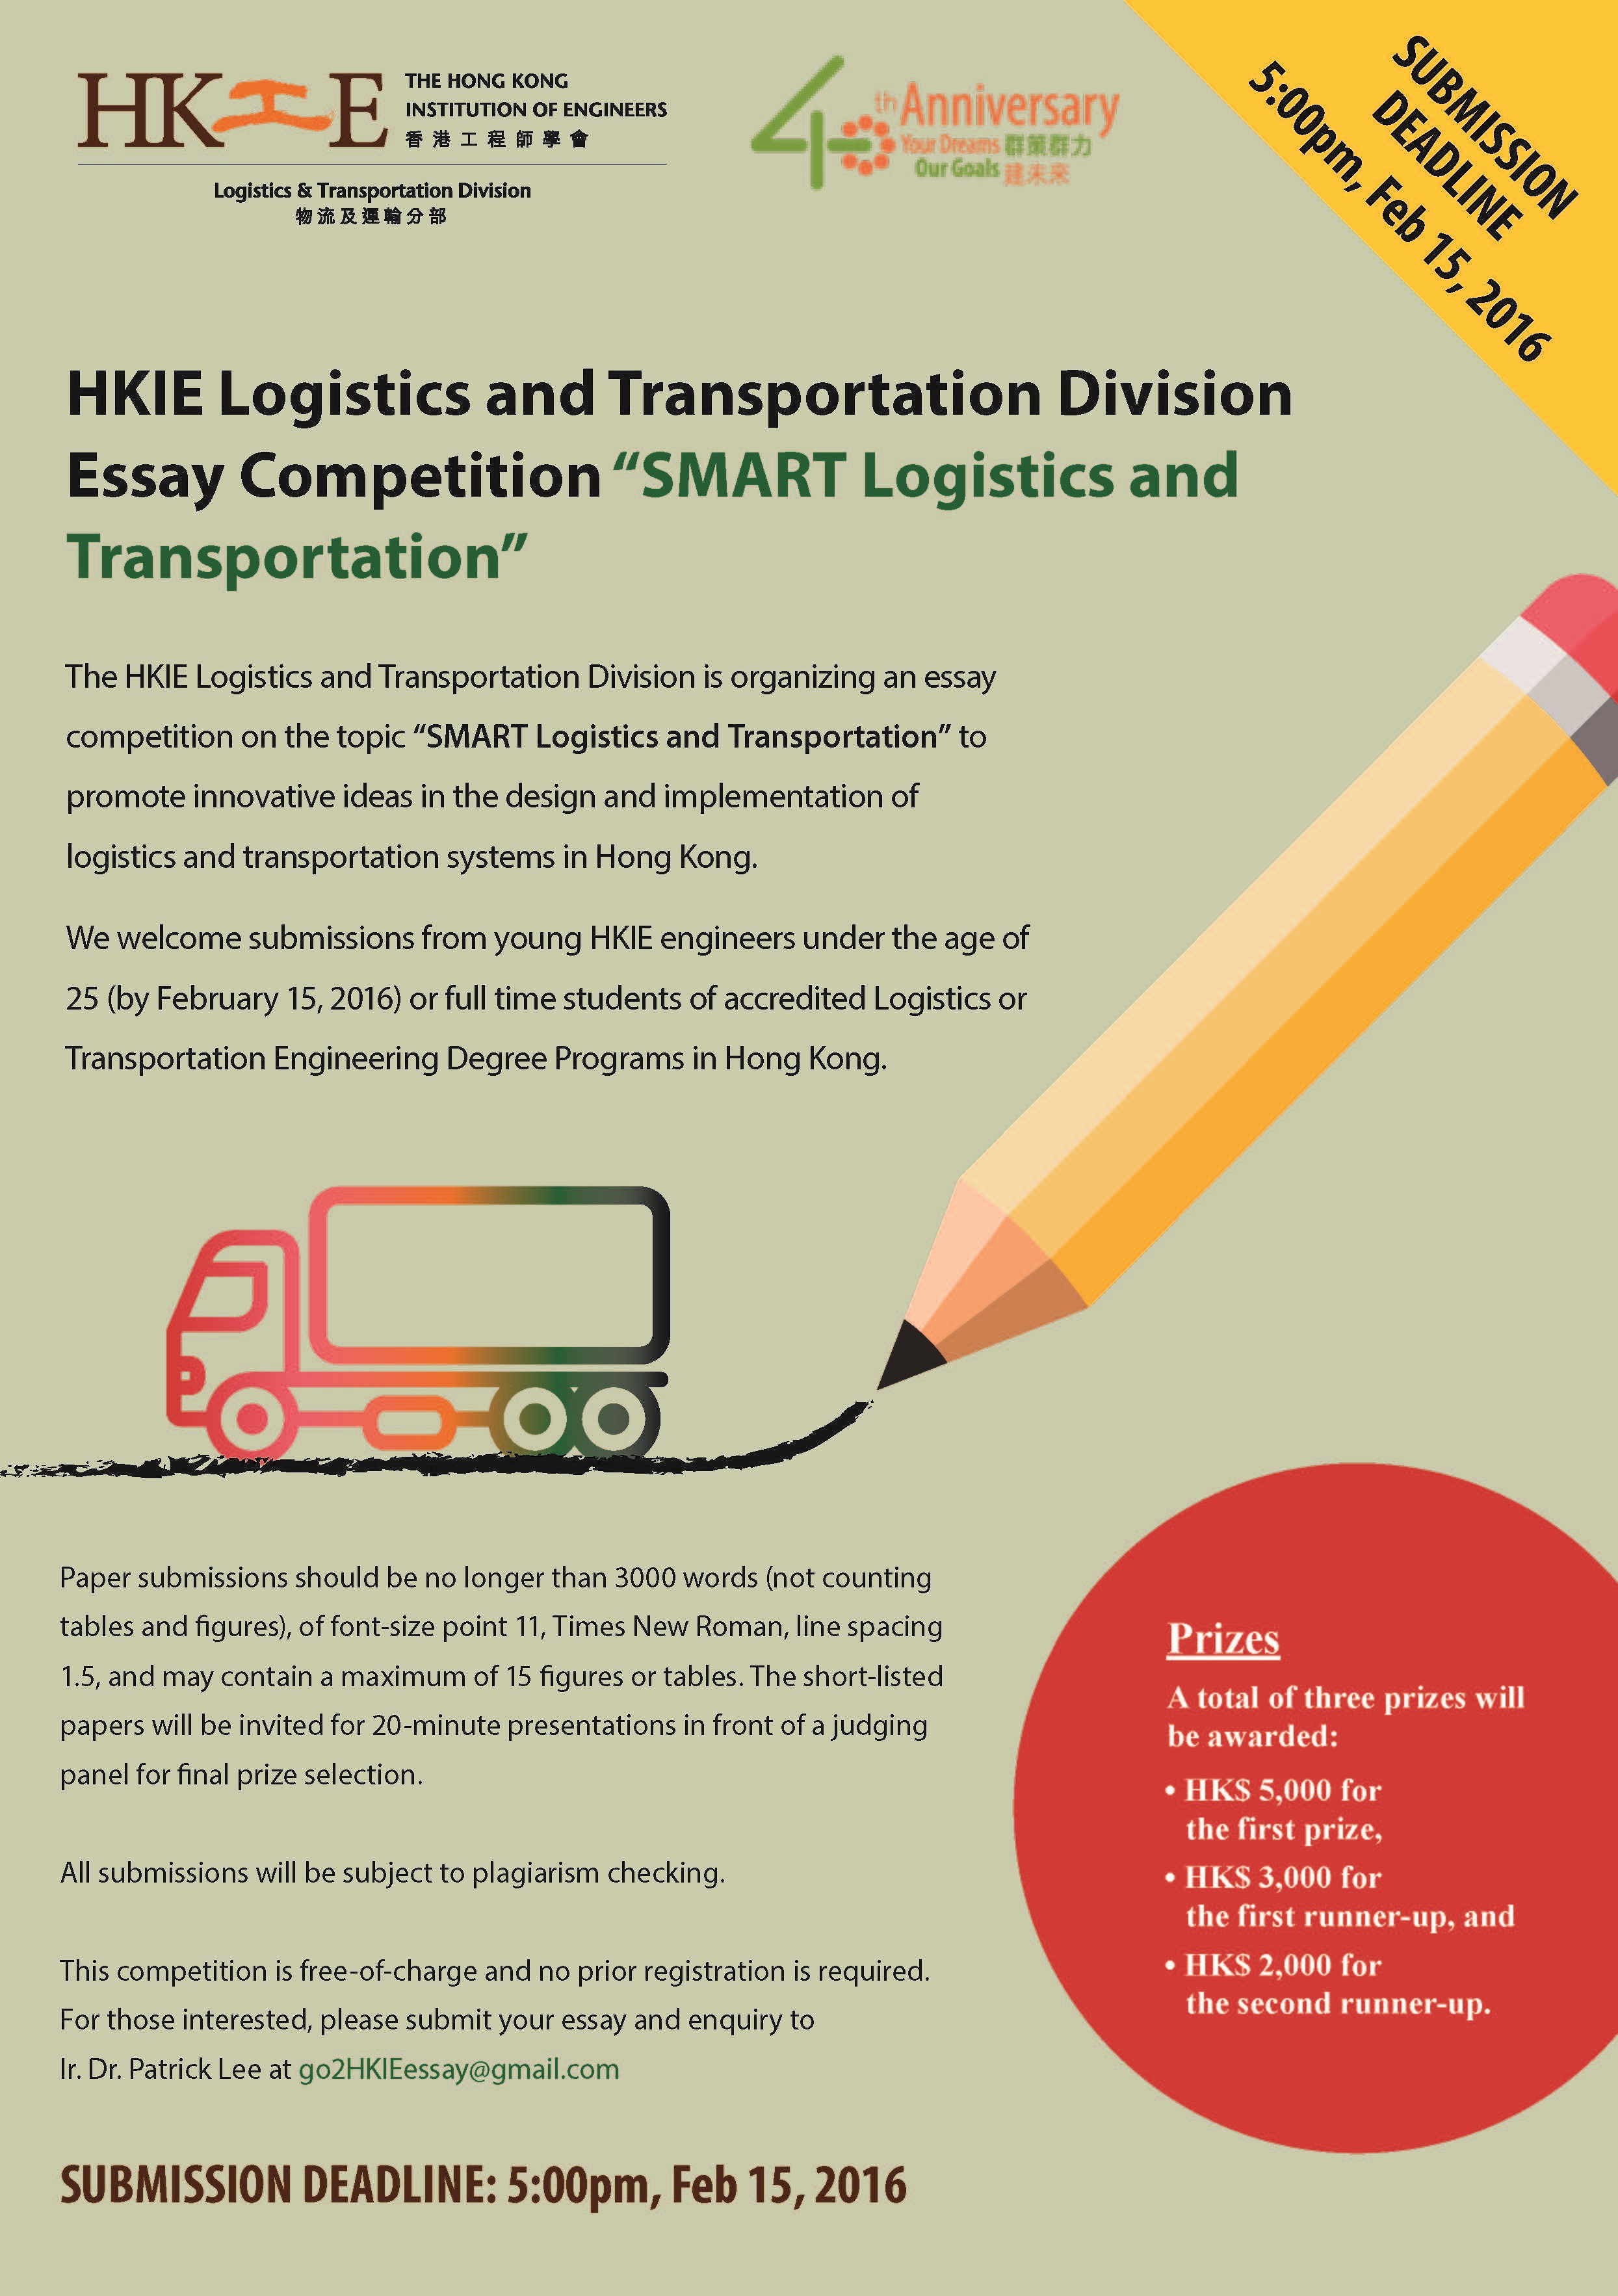 HKIE Logistics and Transportation Division Essay Competition Poster